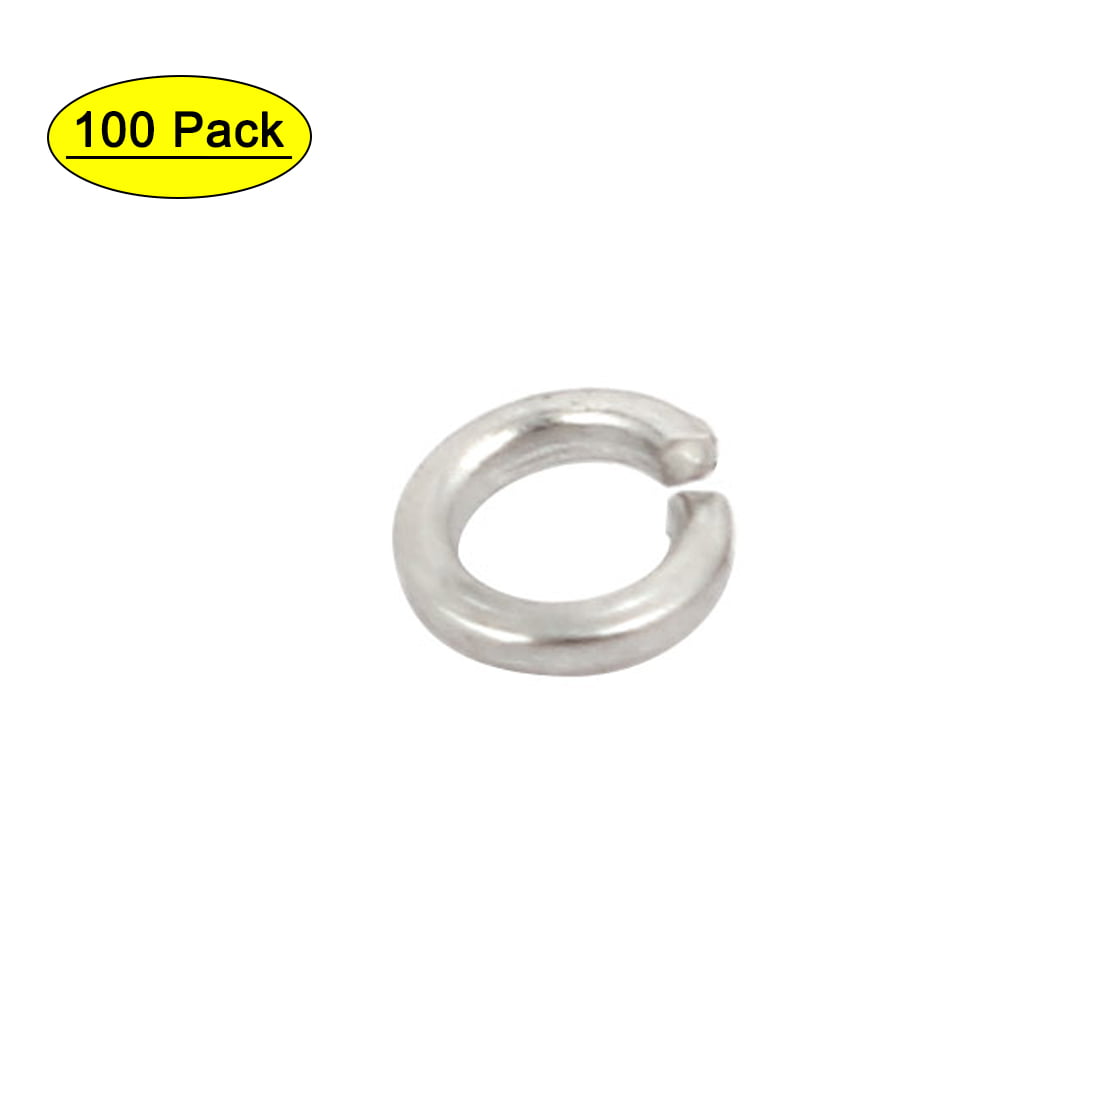 20-SS 1/4 ID LOCK SPLIT WASHERS 18-8 STAINLESS STEEL FASTENERS HARDWARE PARTS 